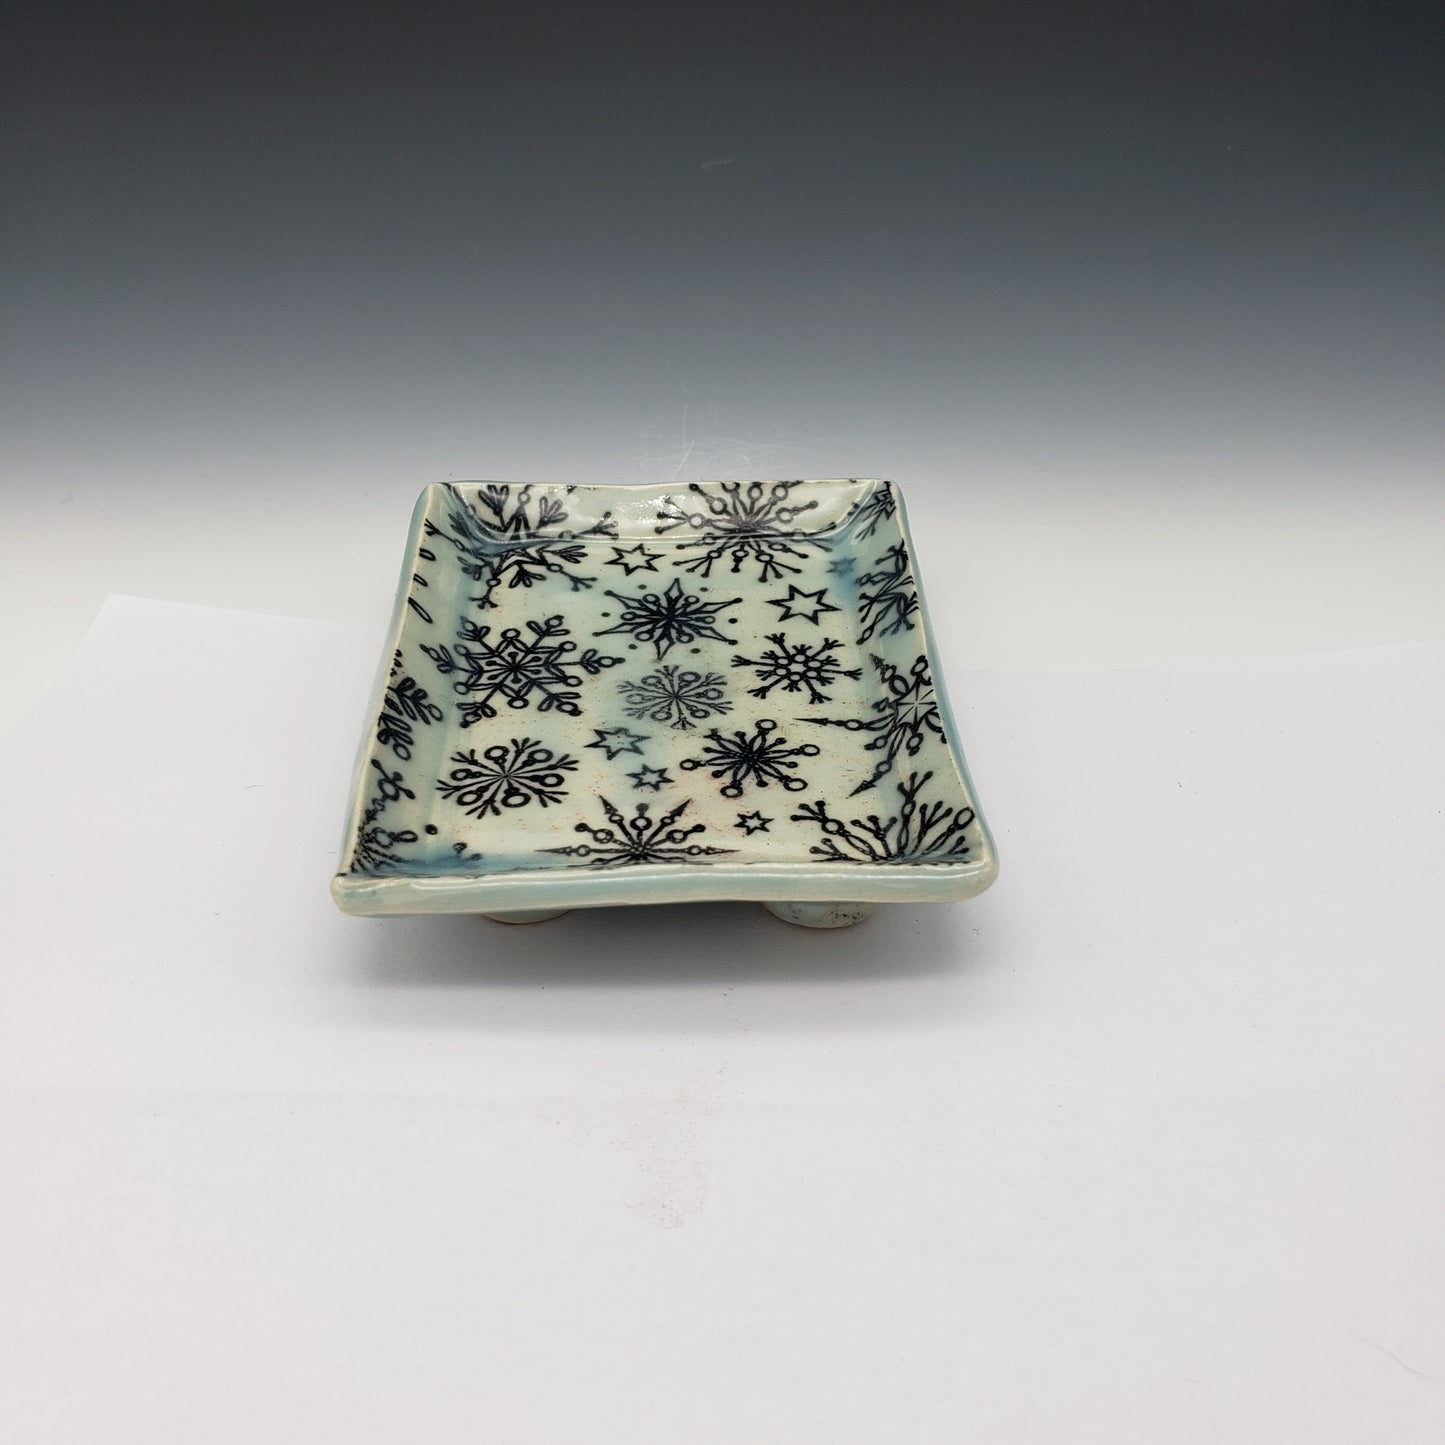 Various patterned 3 inch by 2 1/2 inch rectangle porcelain plates